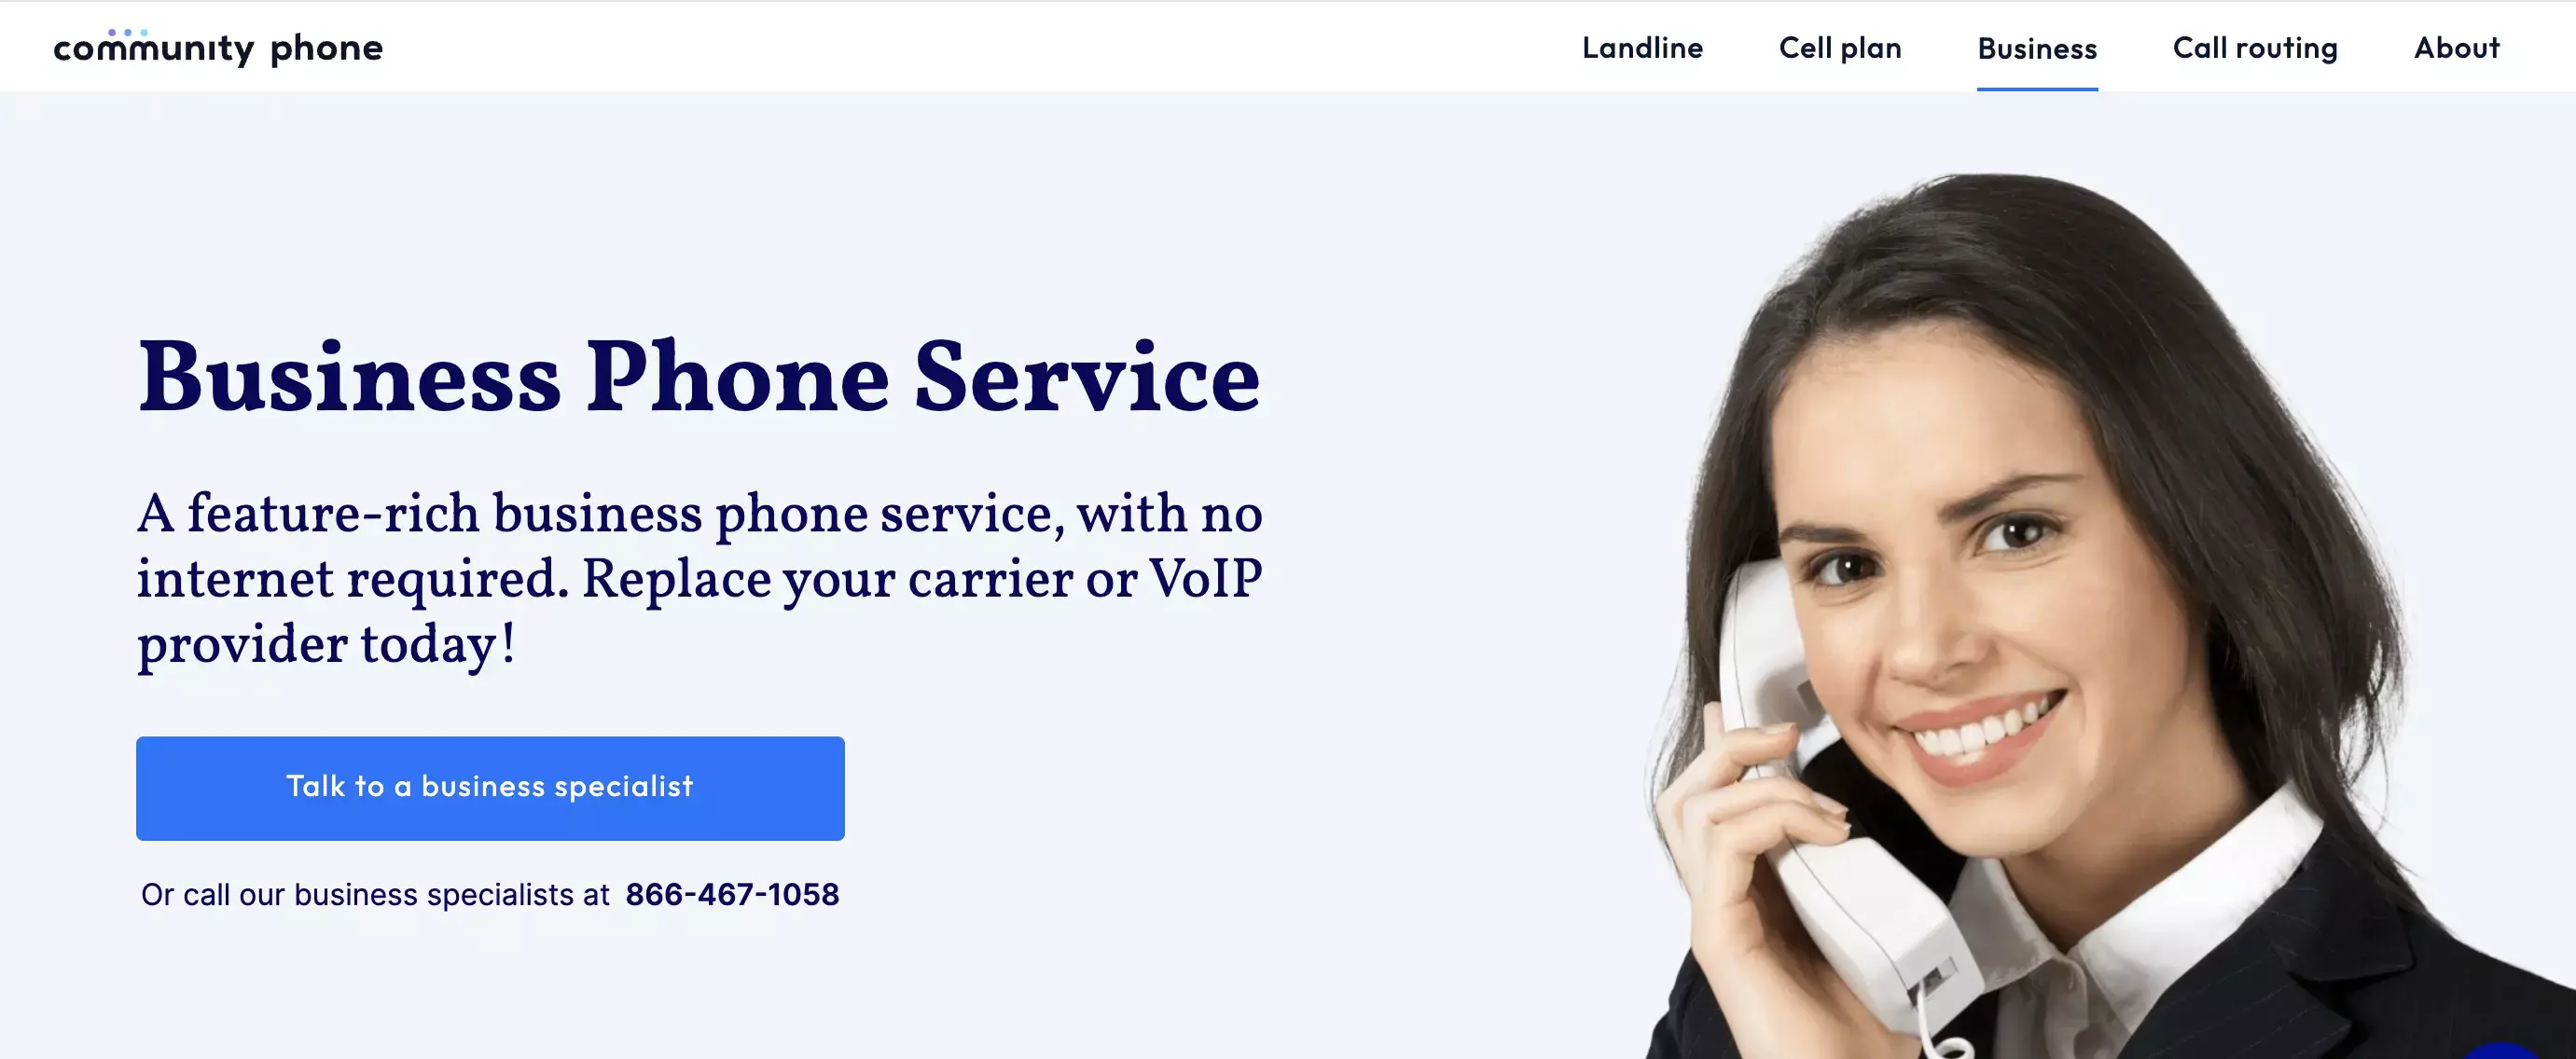 Image of Community Phone business phone service